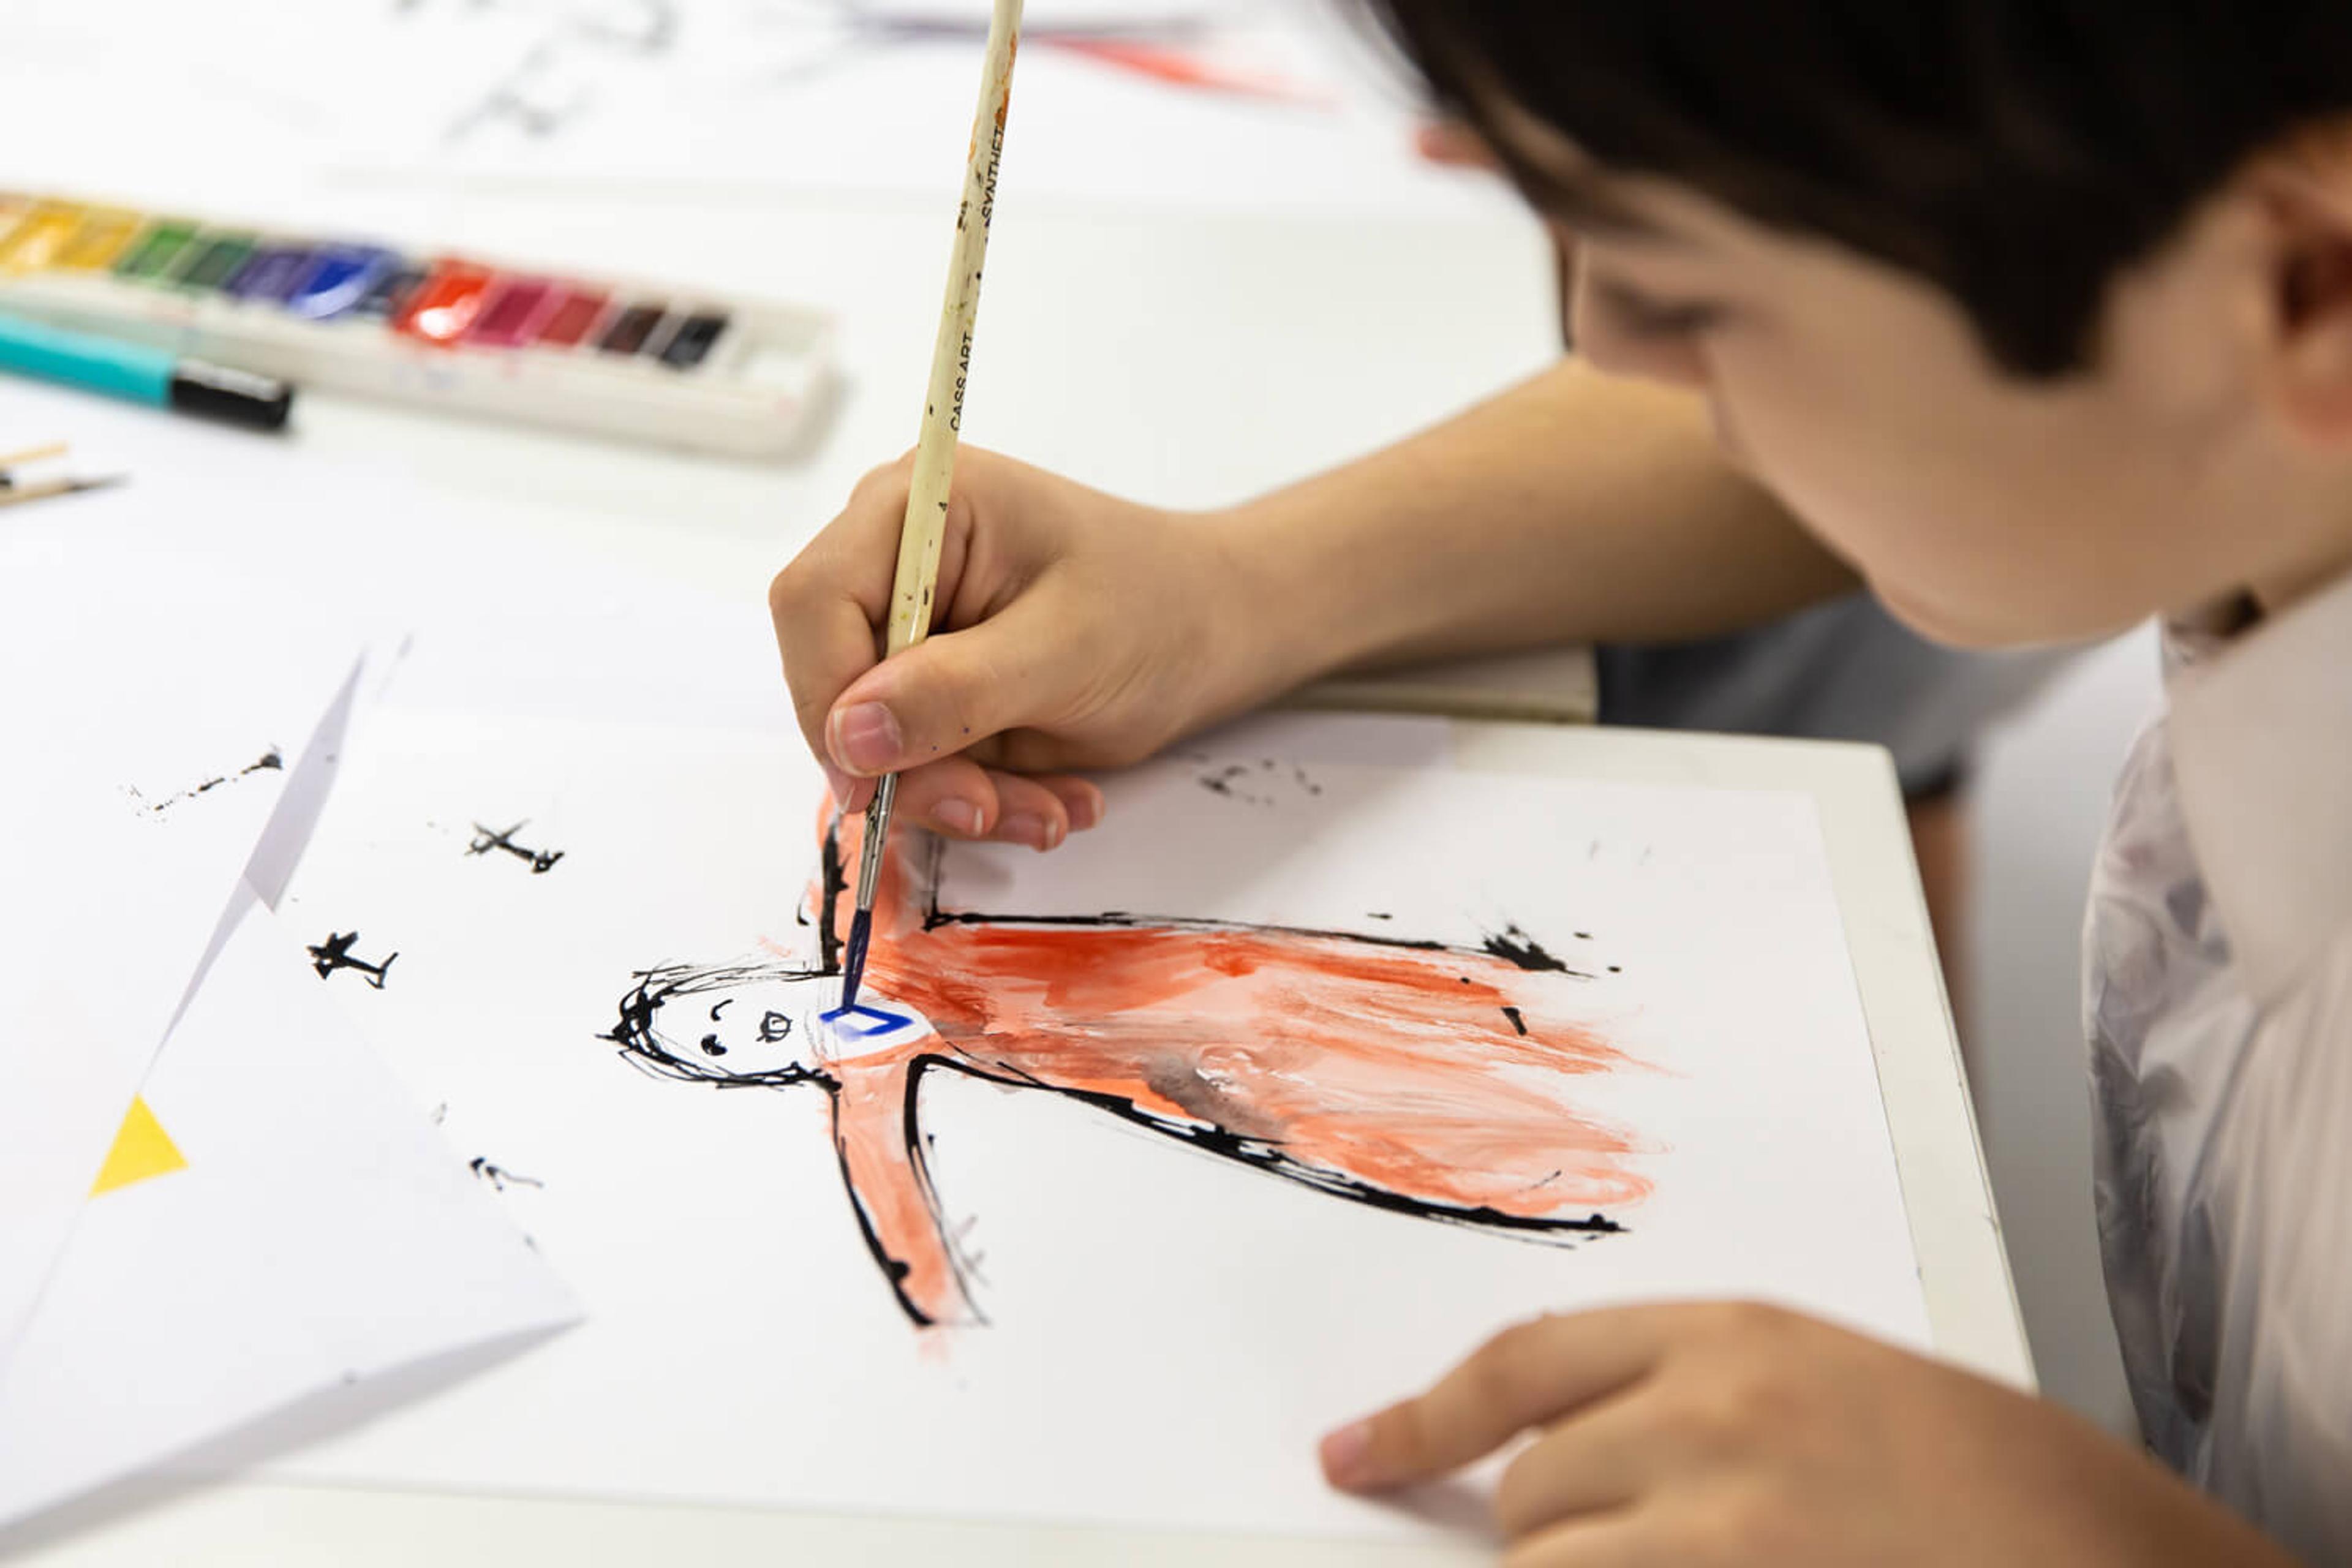 Photograph of a child illustrating with a paint brush